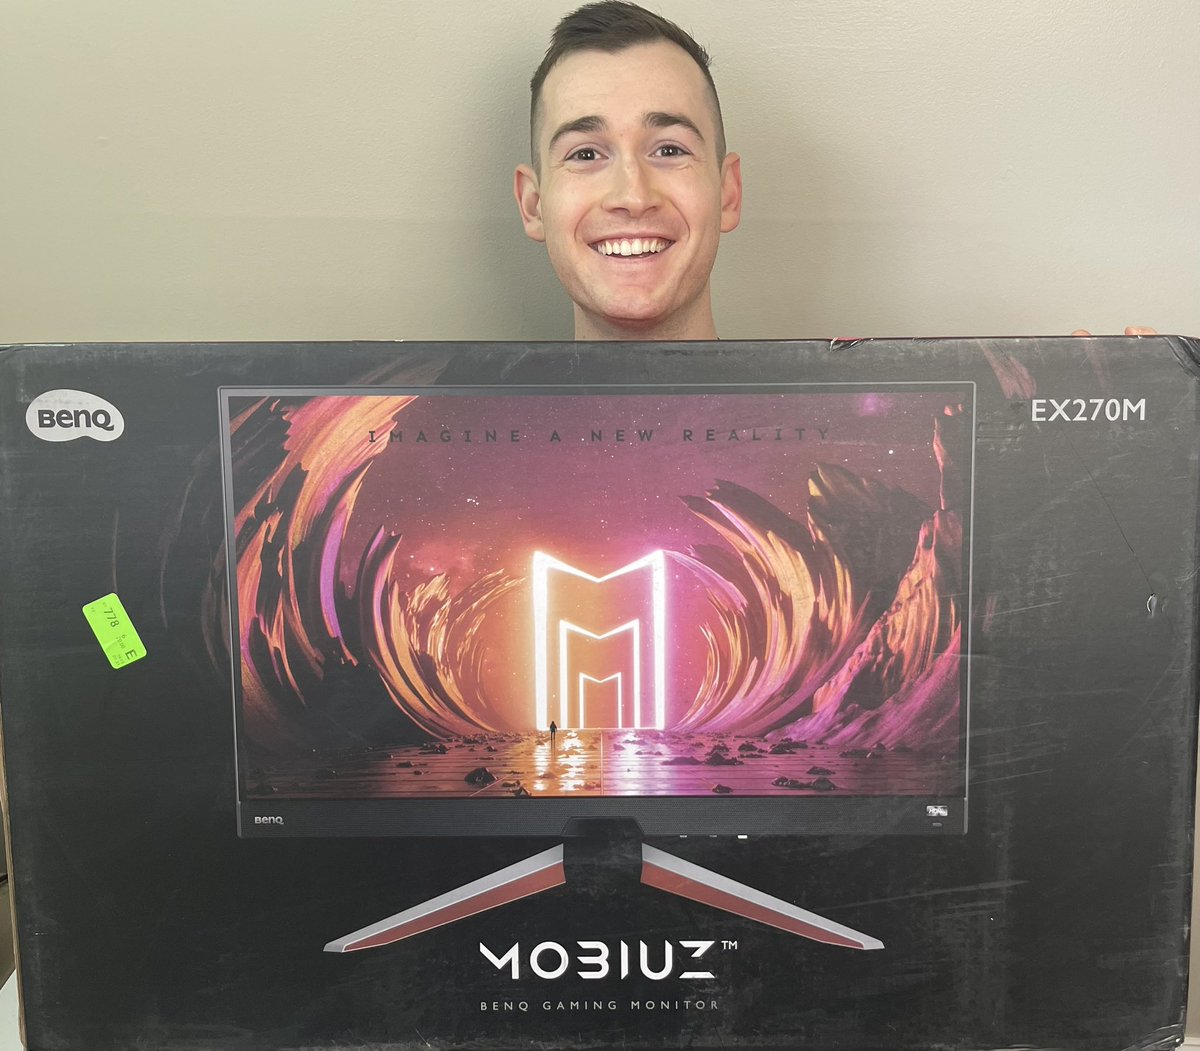 HOLY THANK YOU @MobiuzGaming @BenQAmerica for sending me this #EX270M !!!

Unboxing on stream today - can’t wait to hit my CONTROLLER FLIP on it… LET’S GOOO!!!!!